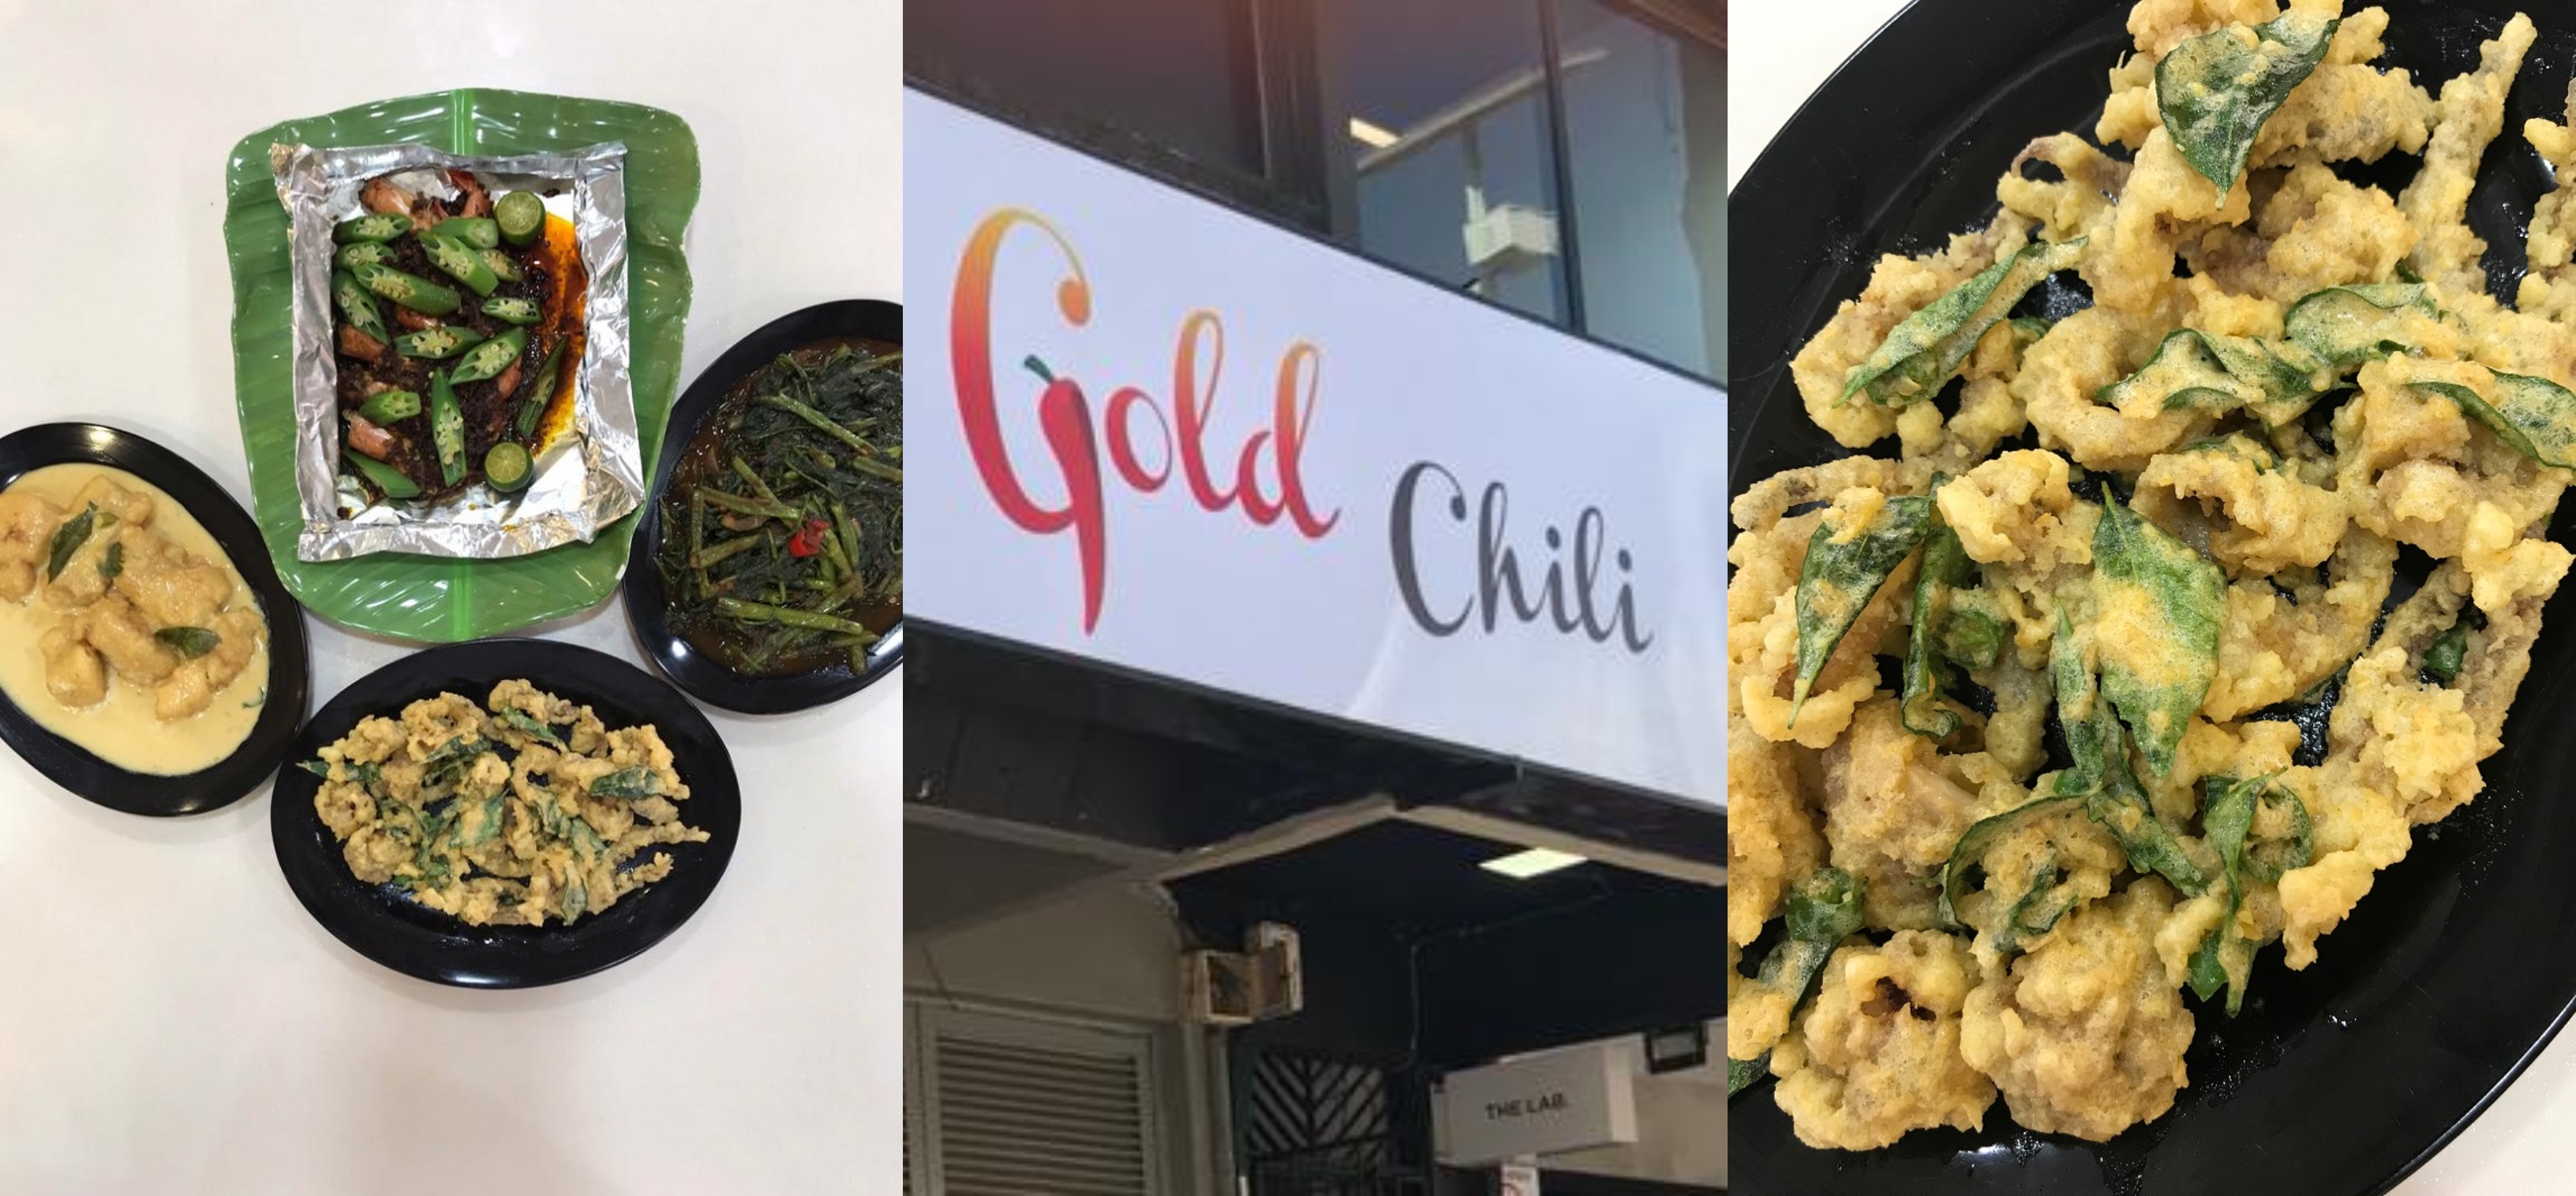 Gold Chili Has Finally Opened A New Branch At SS15 With A New Dish